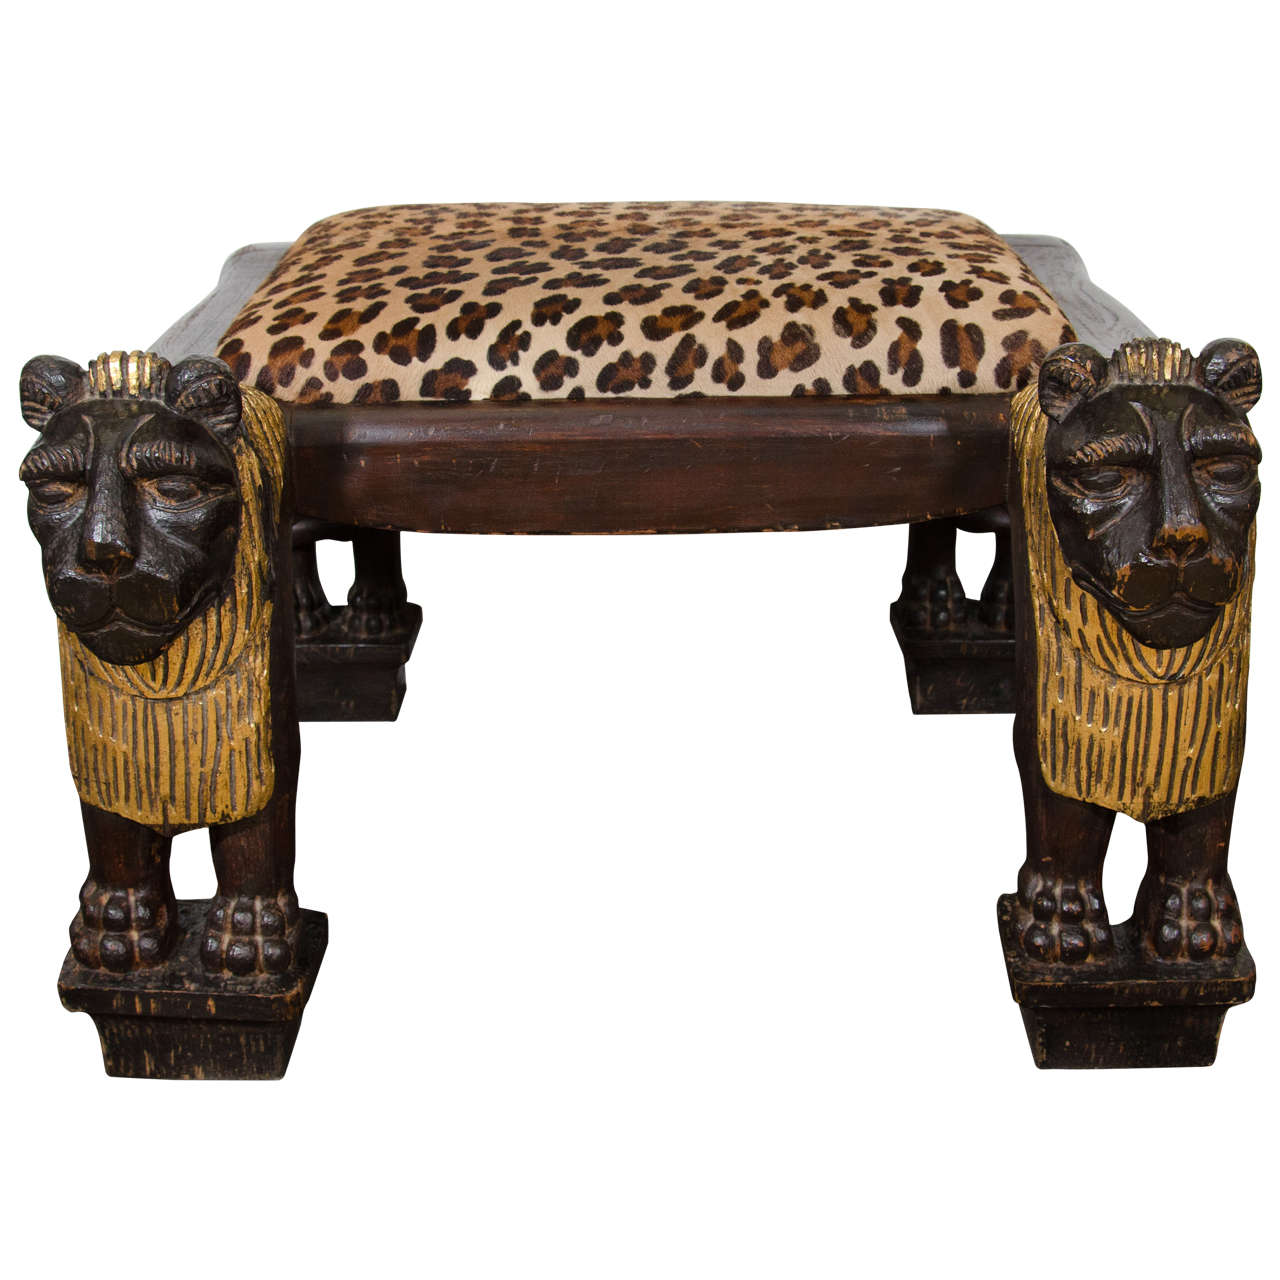 Egyptian Revival Style, Highly Decorative, Carved Wood Lion Bench